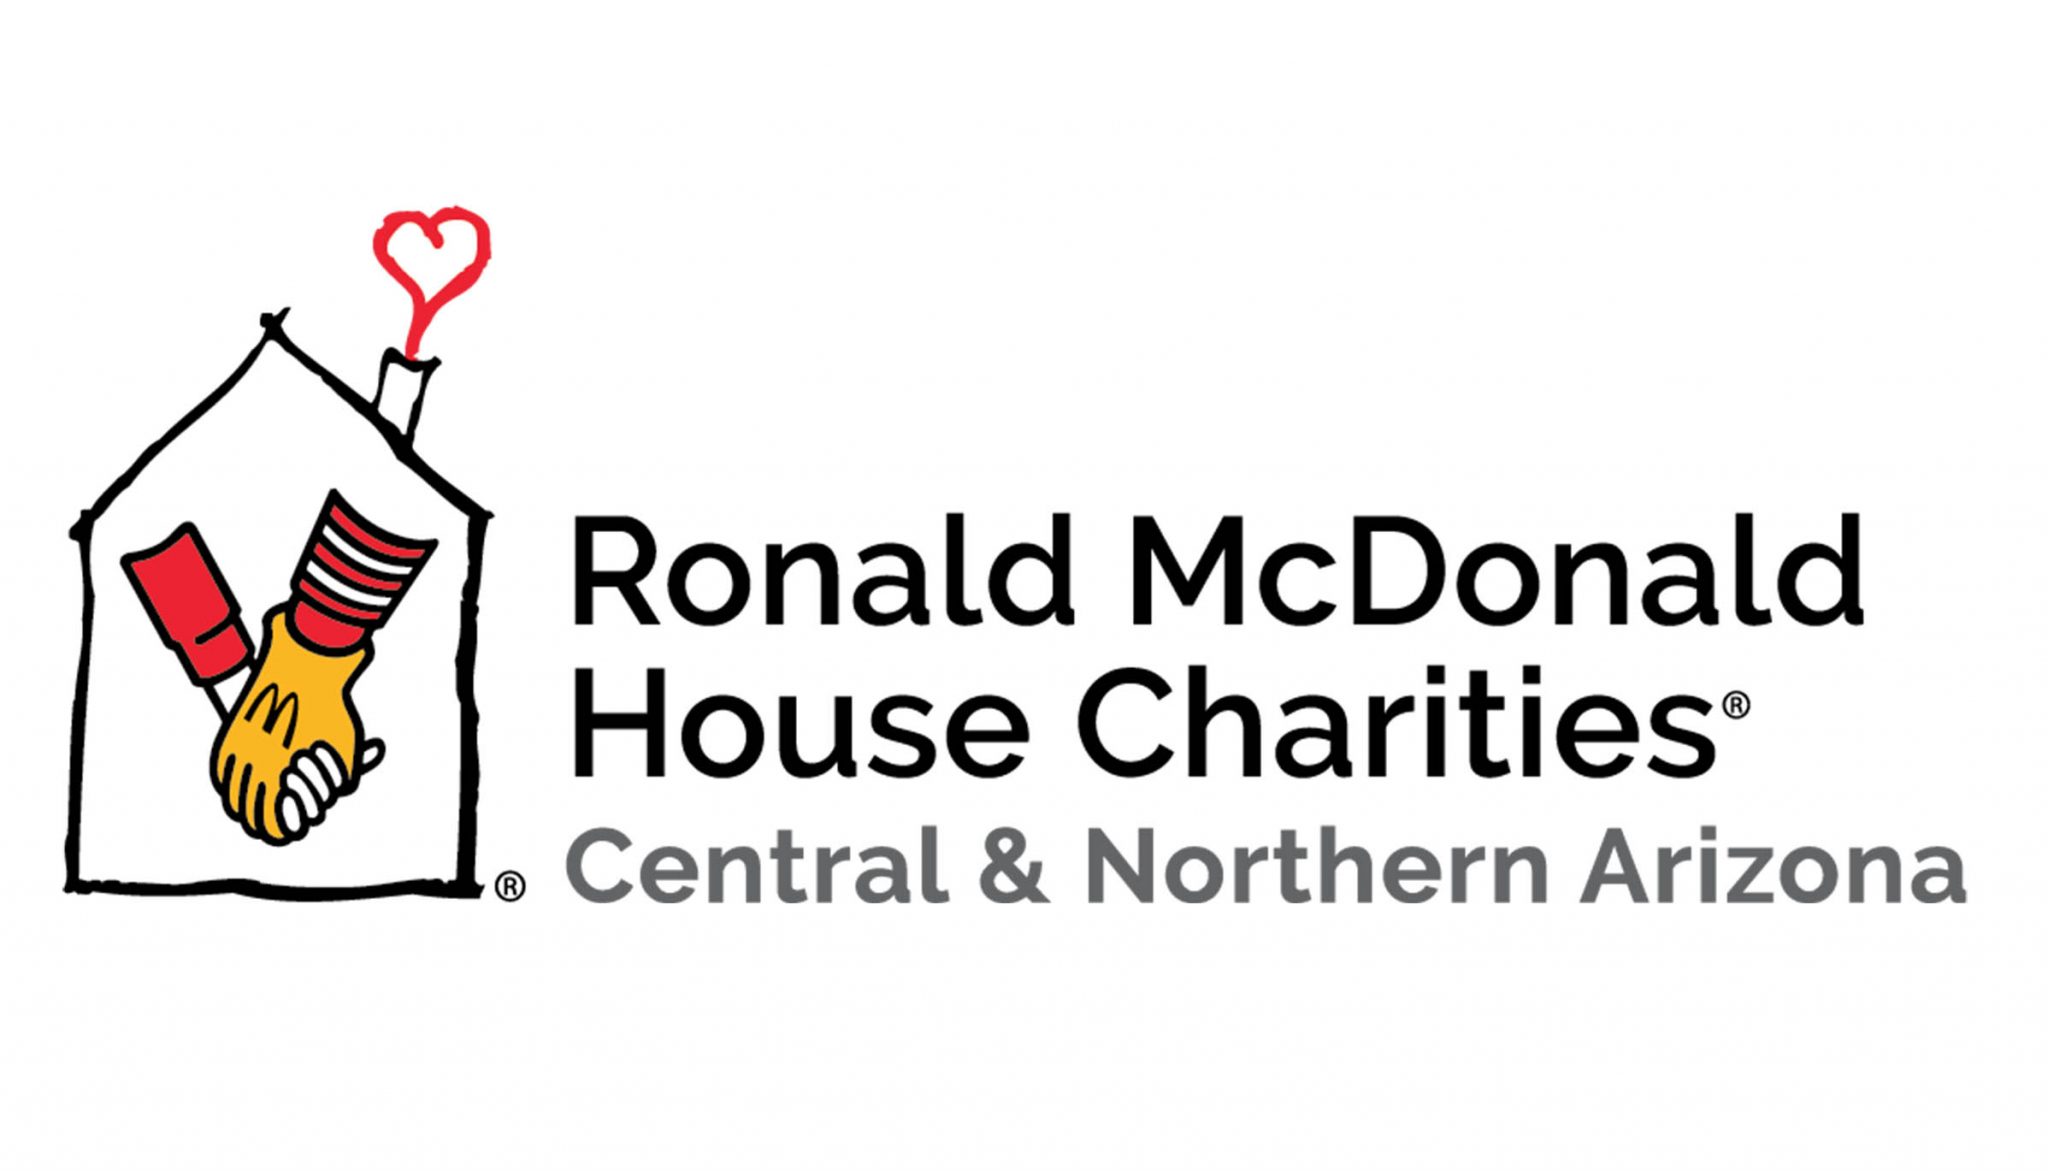 RMHC of Central and Northern Arizona logo